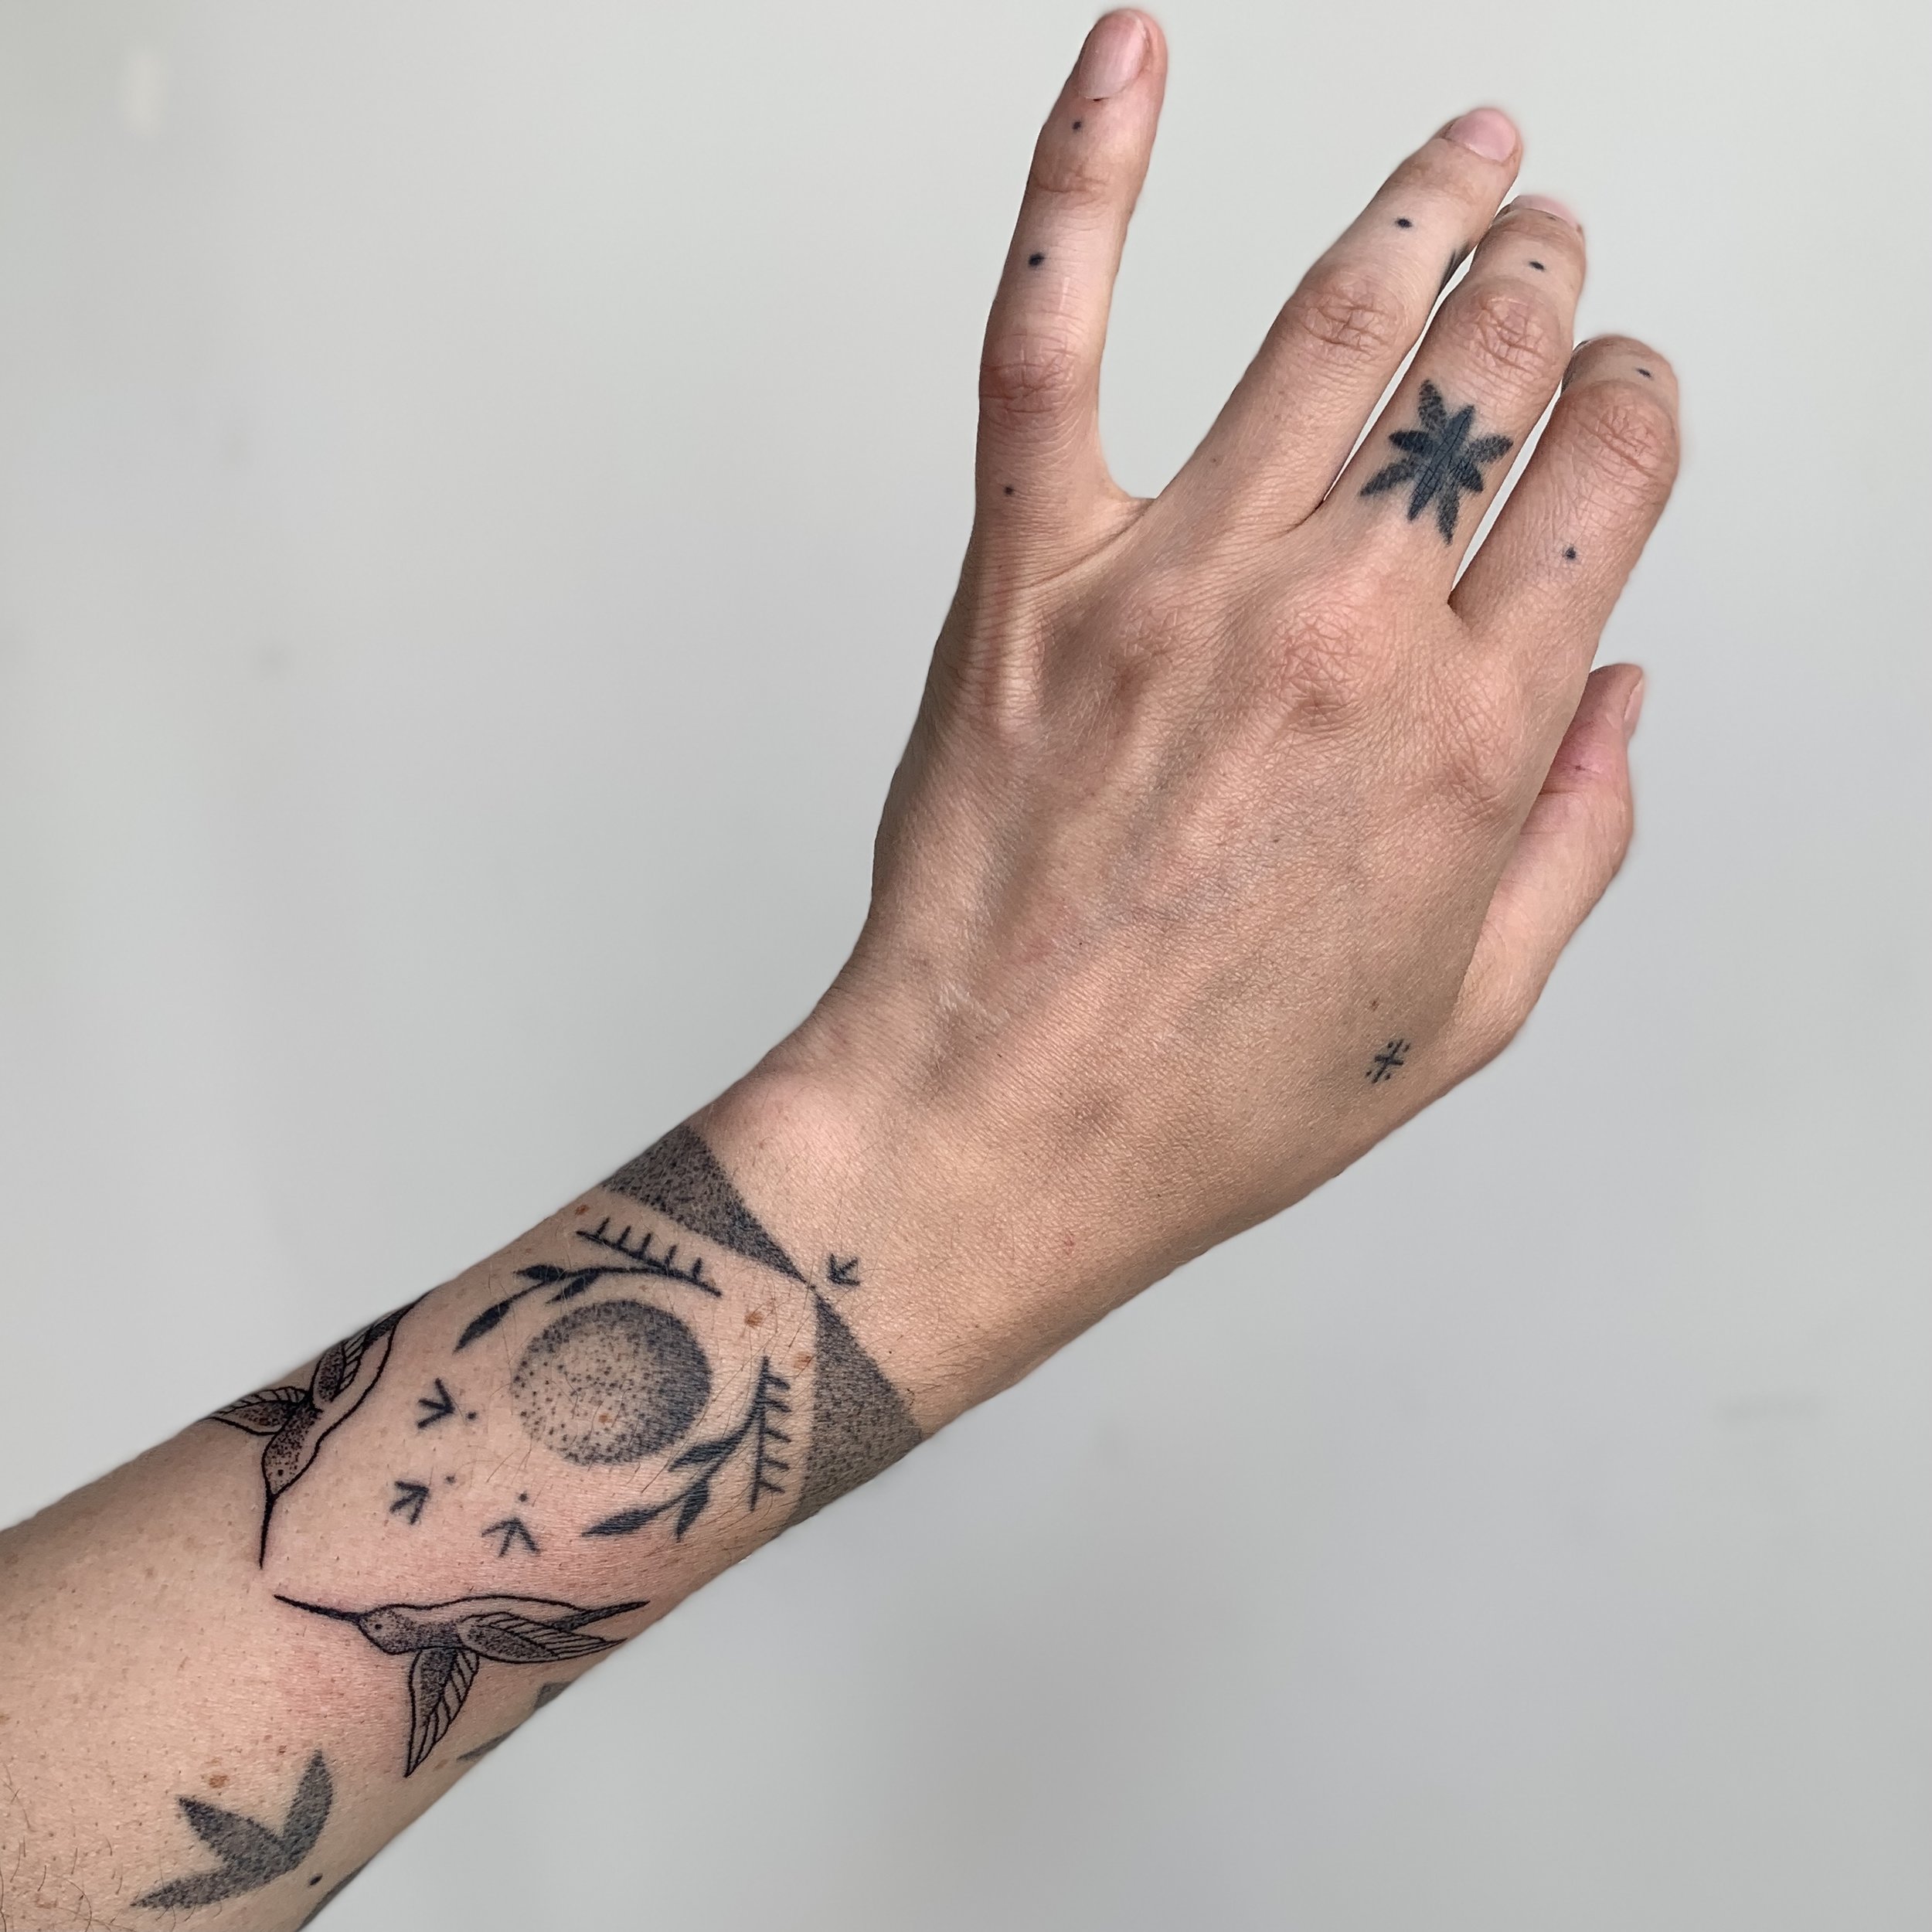 How to Find a Tattoo Artist that Fits Your Style | Tattooaholic.com